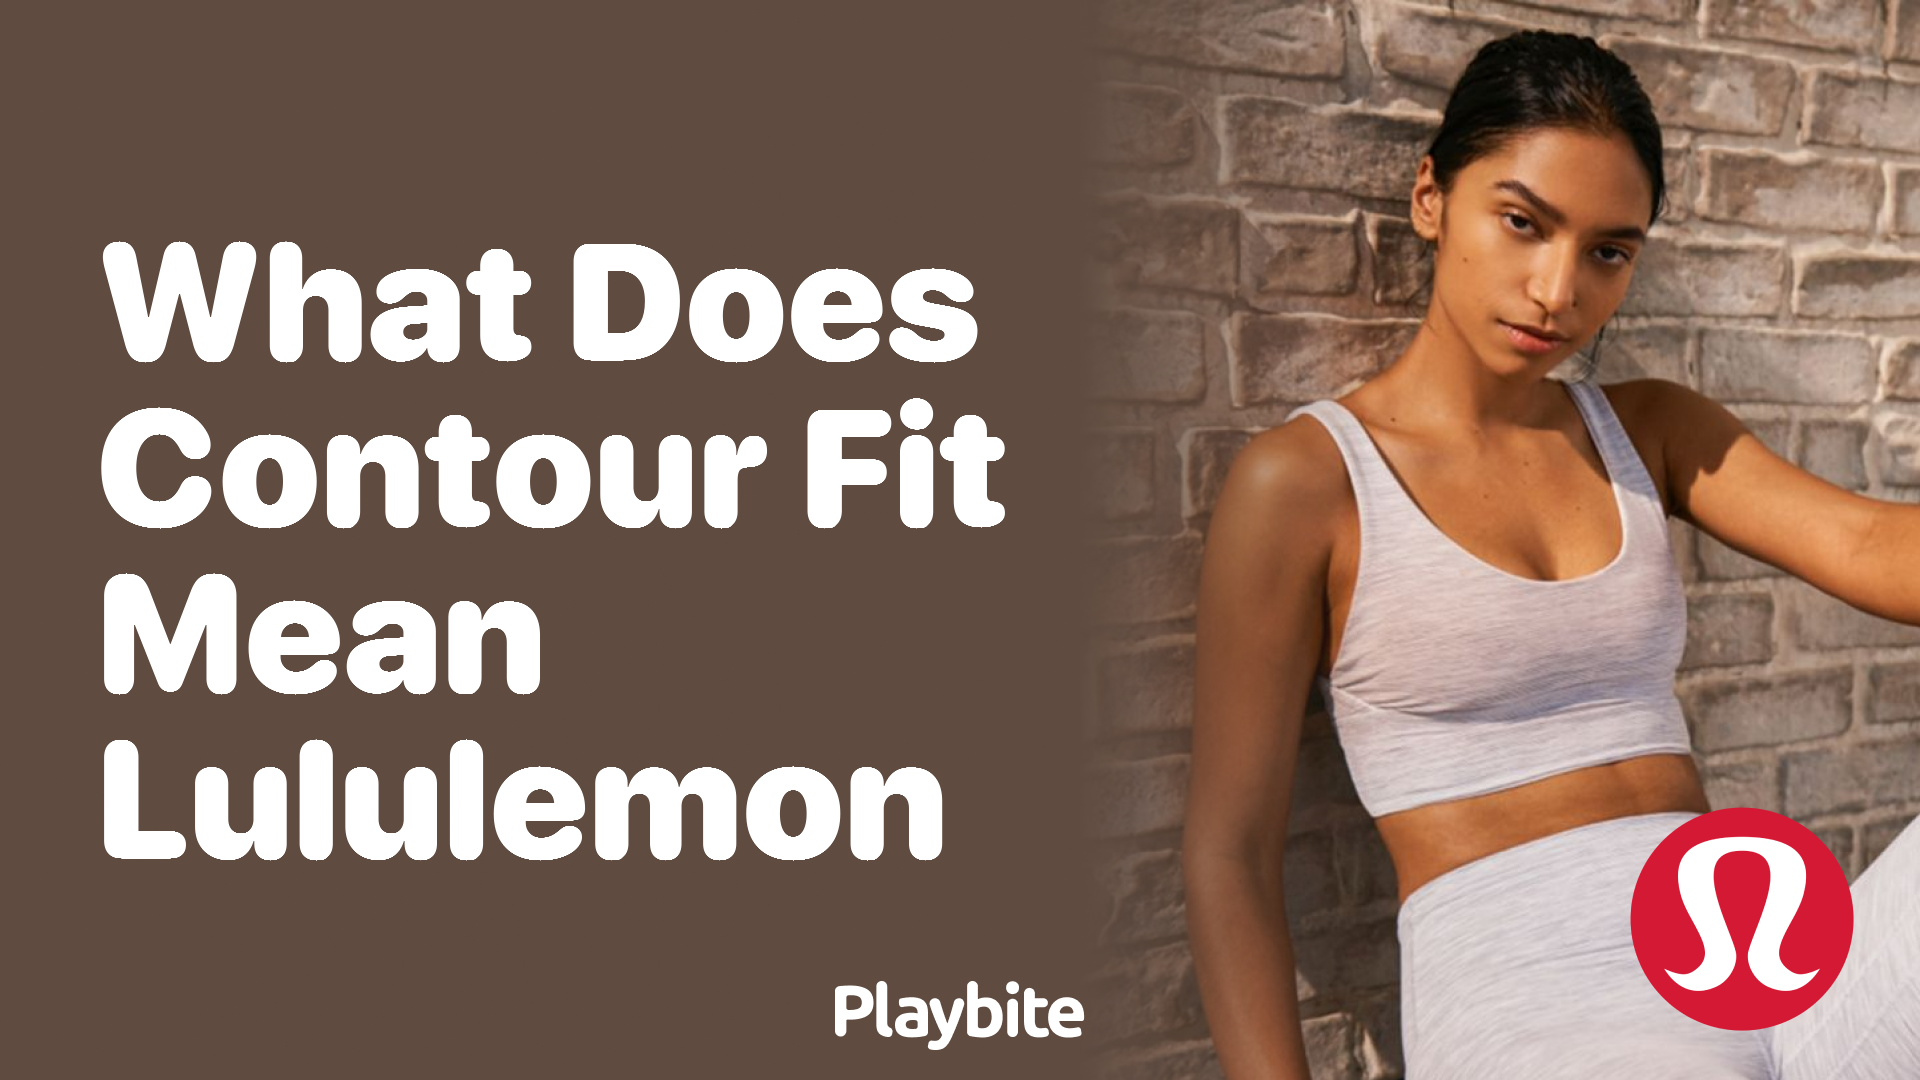 What Does Contour Fit Mean at Lululemon? - Playbite